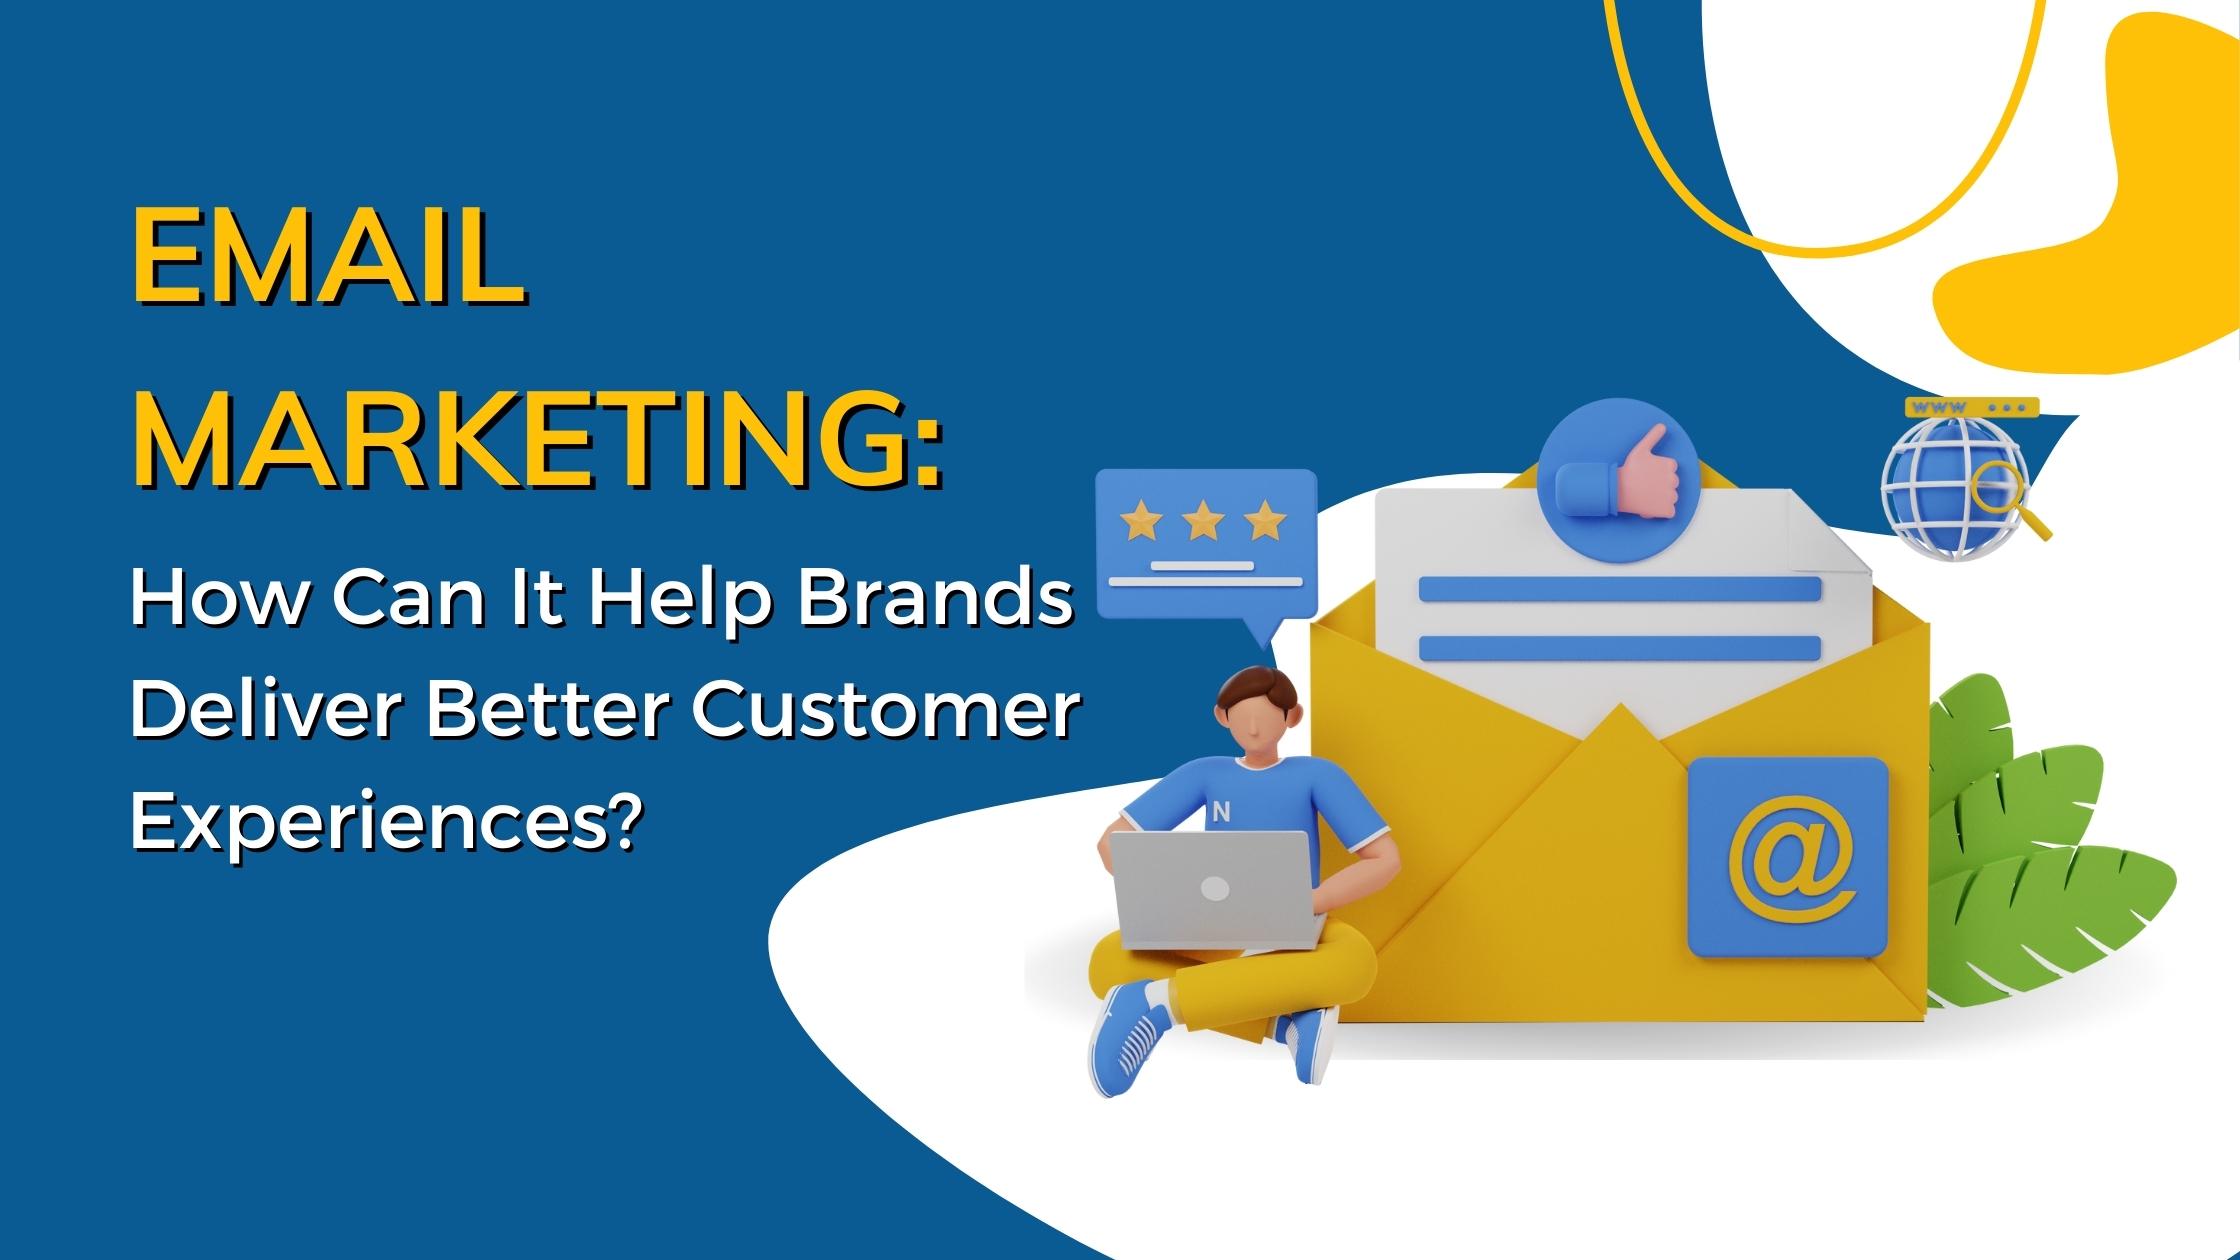 Email Marketing: How Can It Help Brands Deliver Better Customer Experiences?